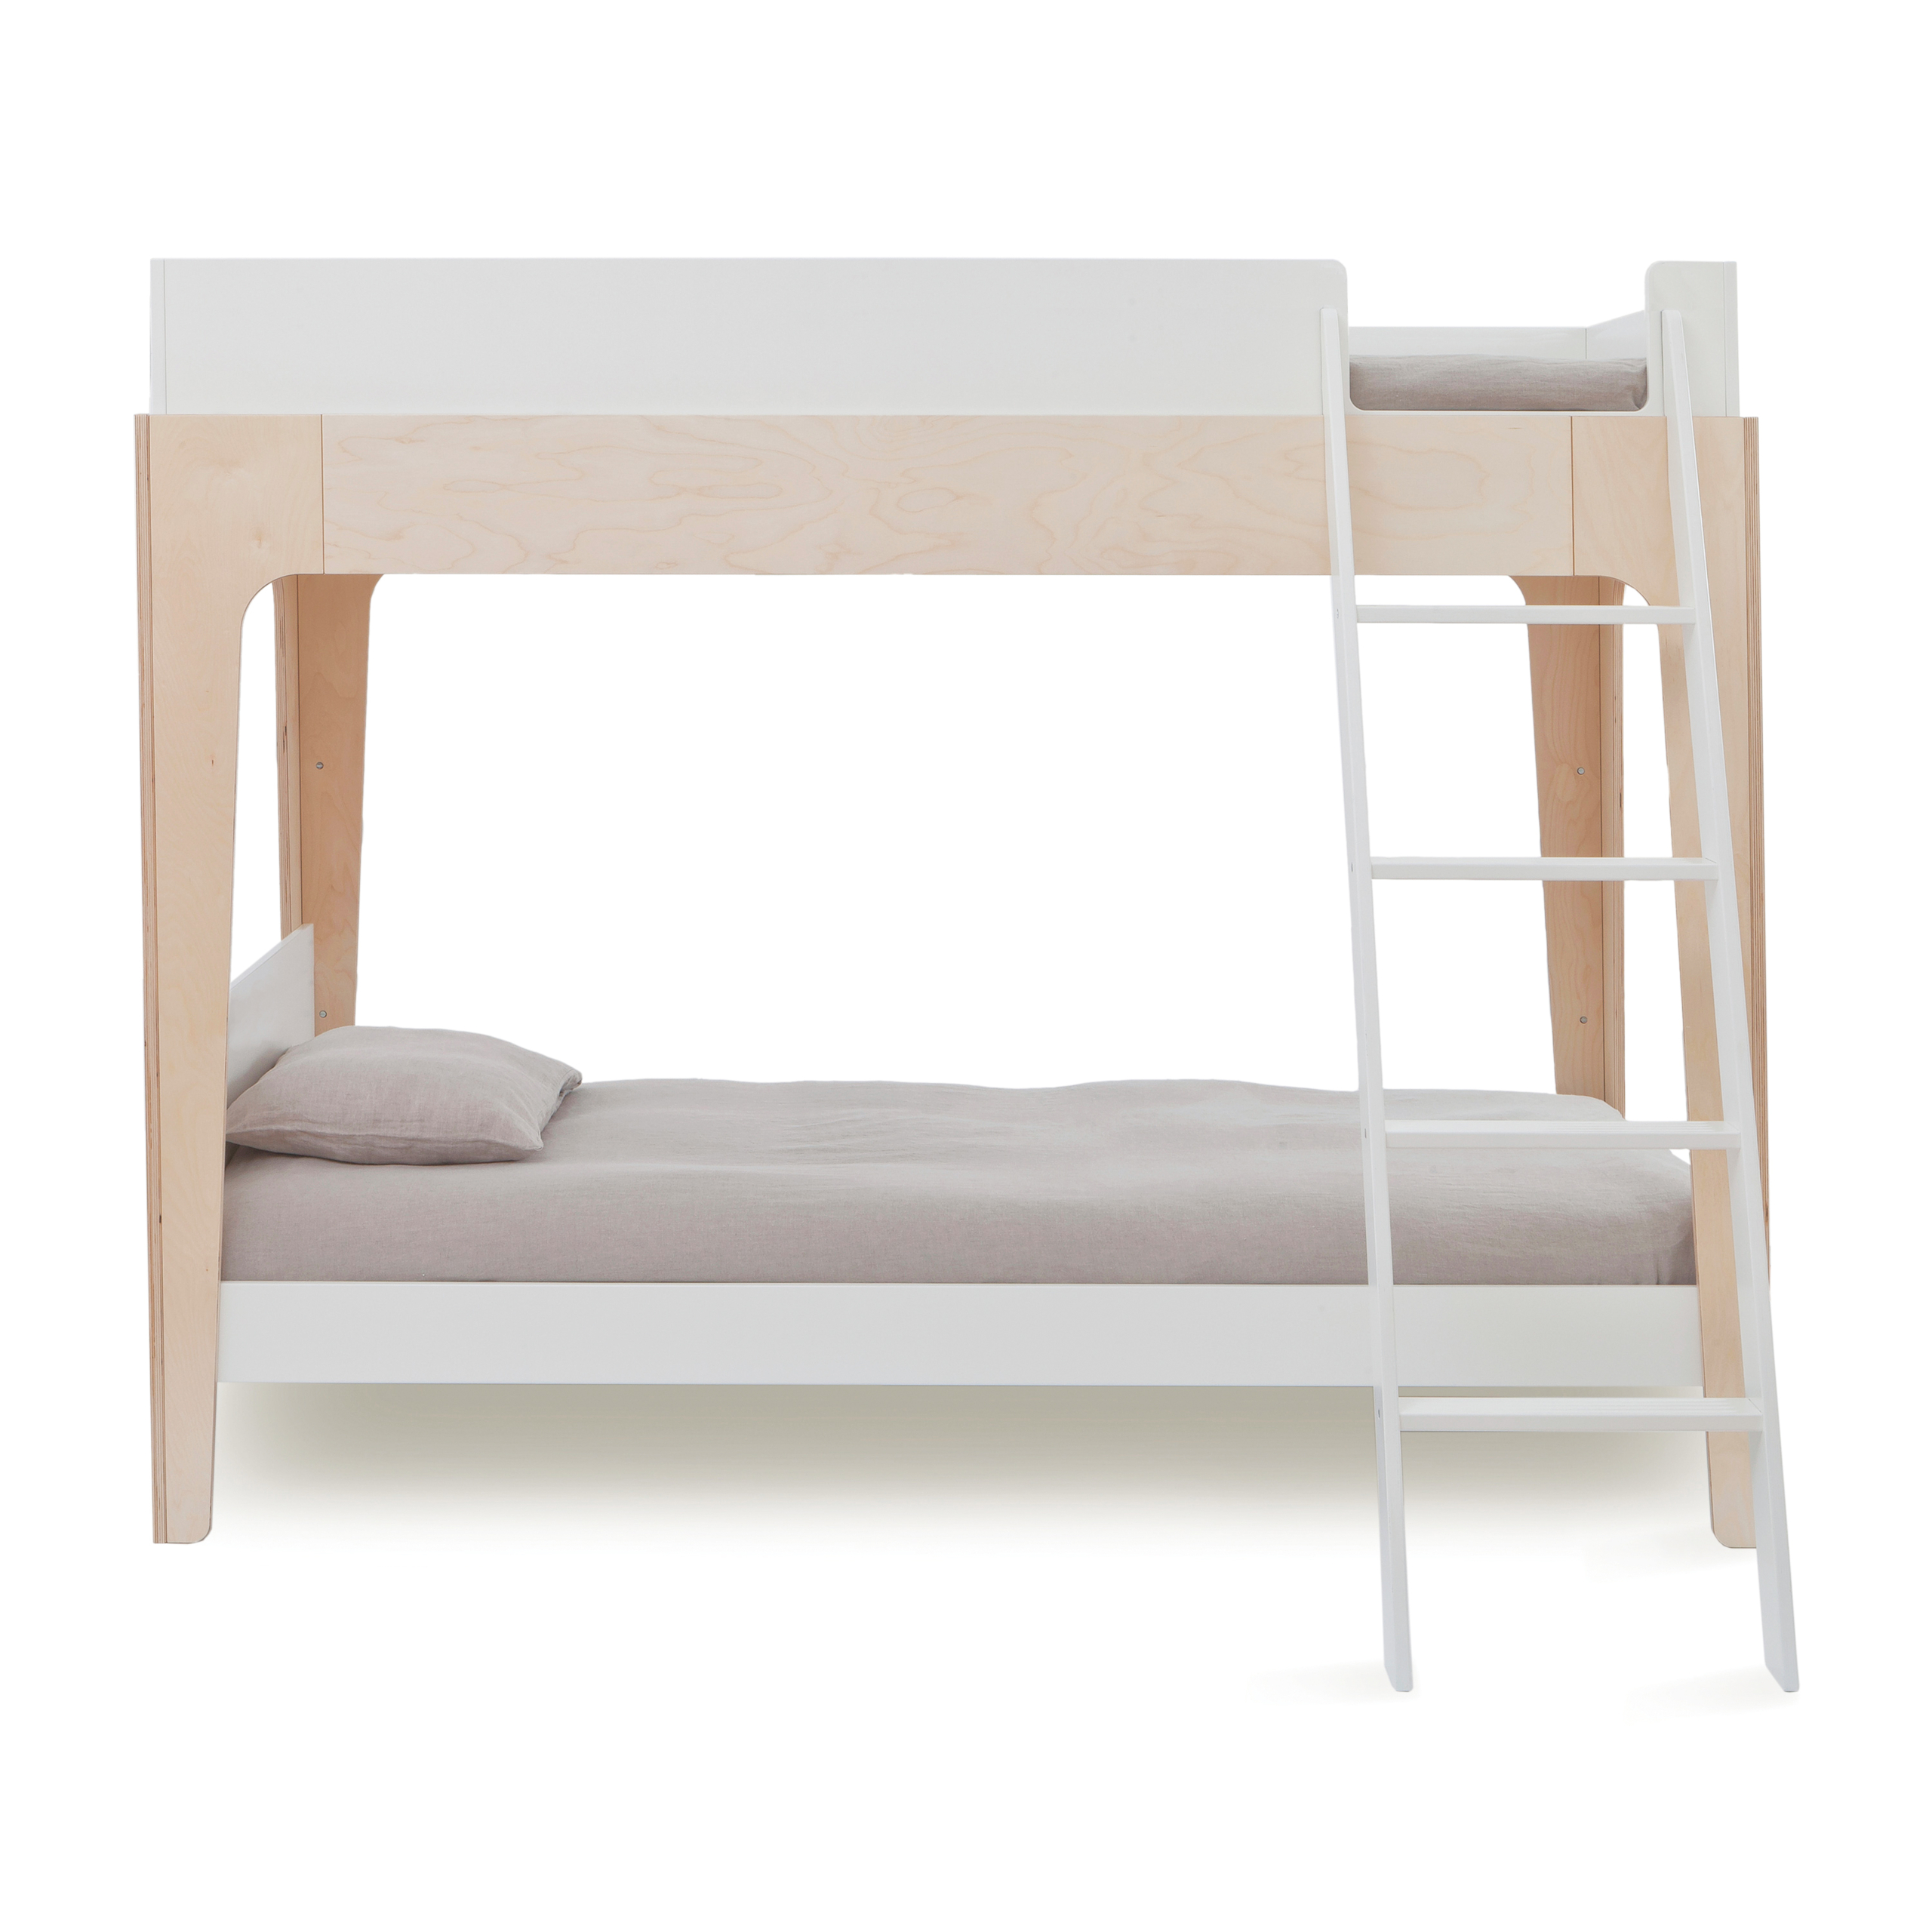 Cool bunk beds for adults